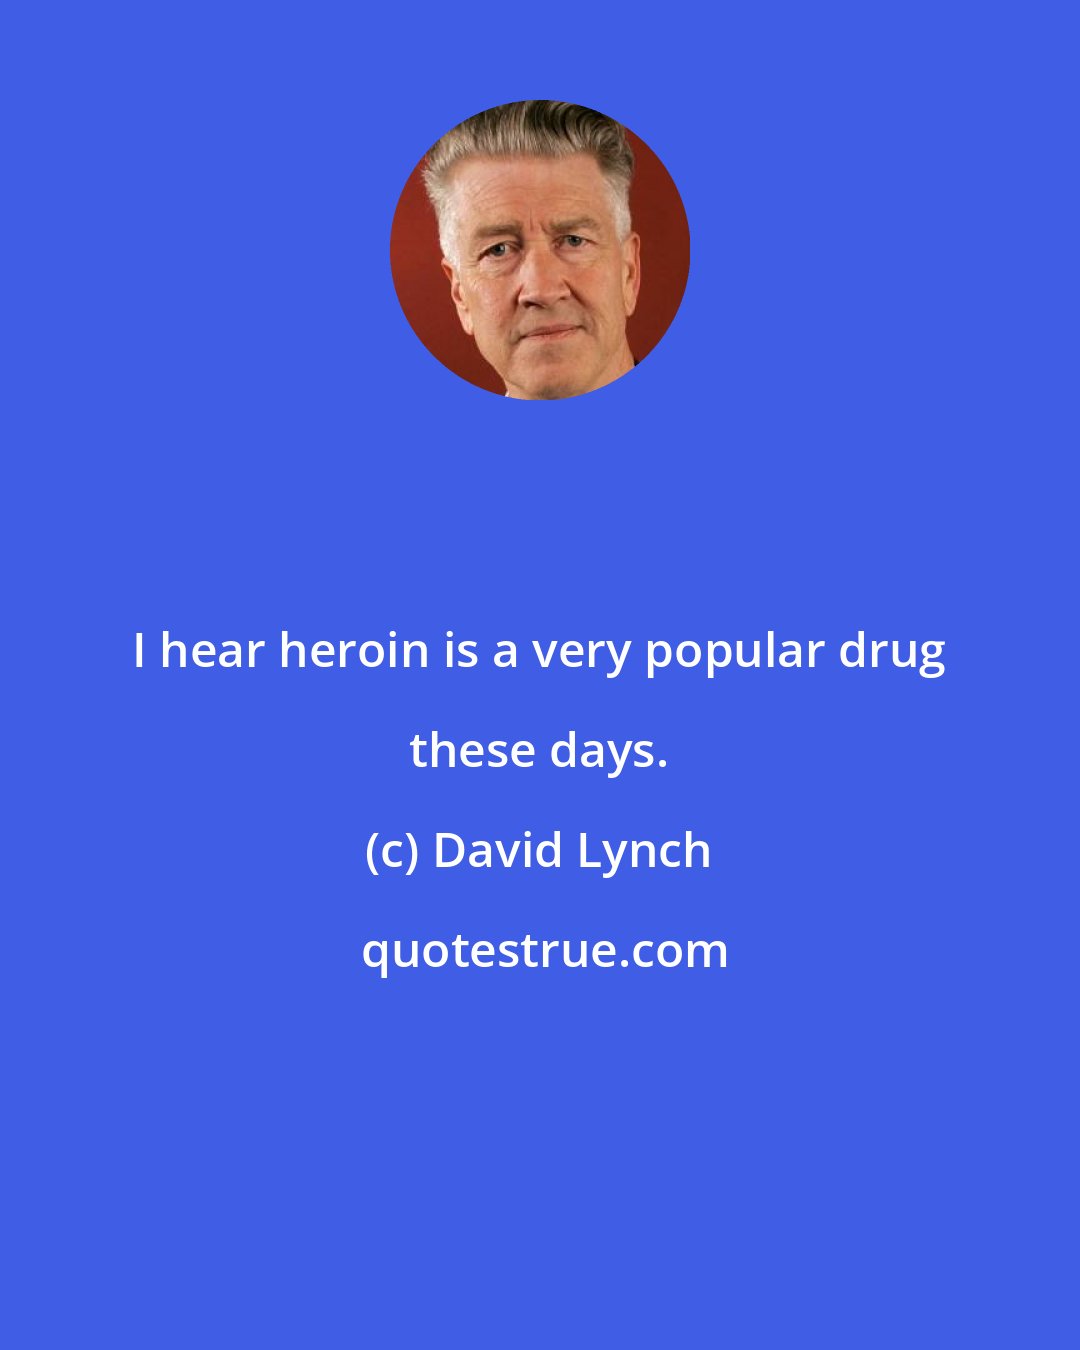 David Lynch: I hear heroin is a very popular drug these days.